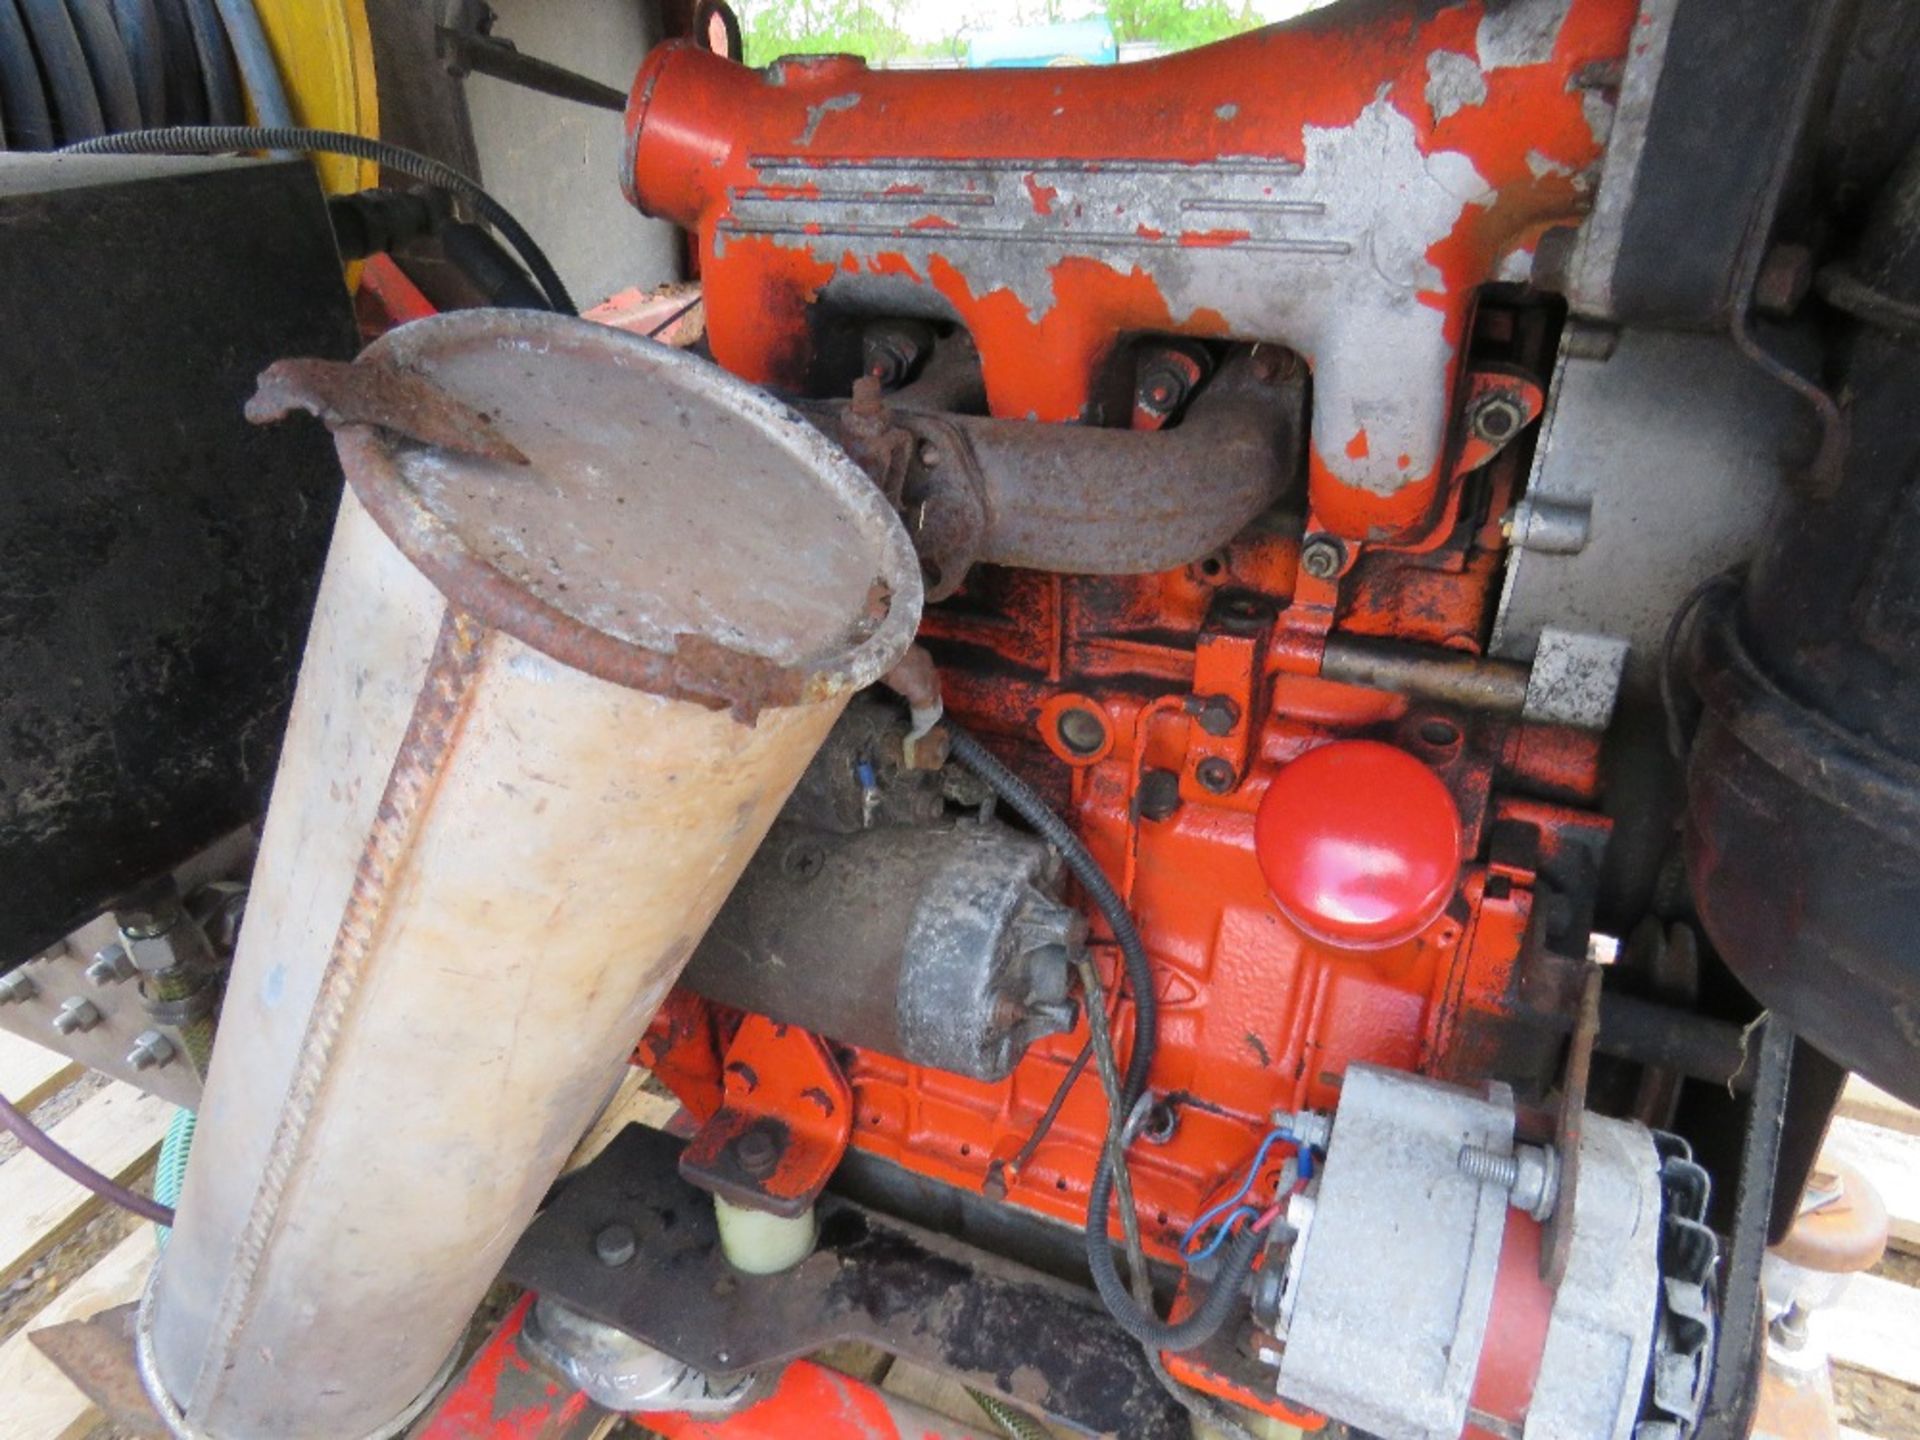 DIESEL ENGINED 3 CYLINDER HIGH PRESSURE JETTING/WASHER UNIT. UNTESTED, CONDITION UNKNOWN. - Image 6 of 8